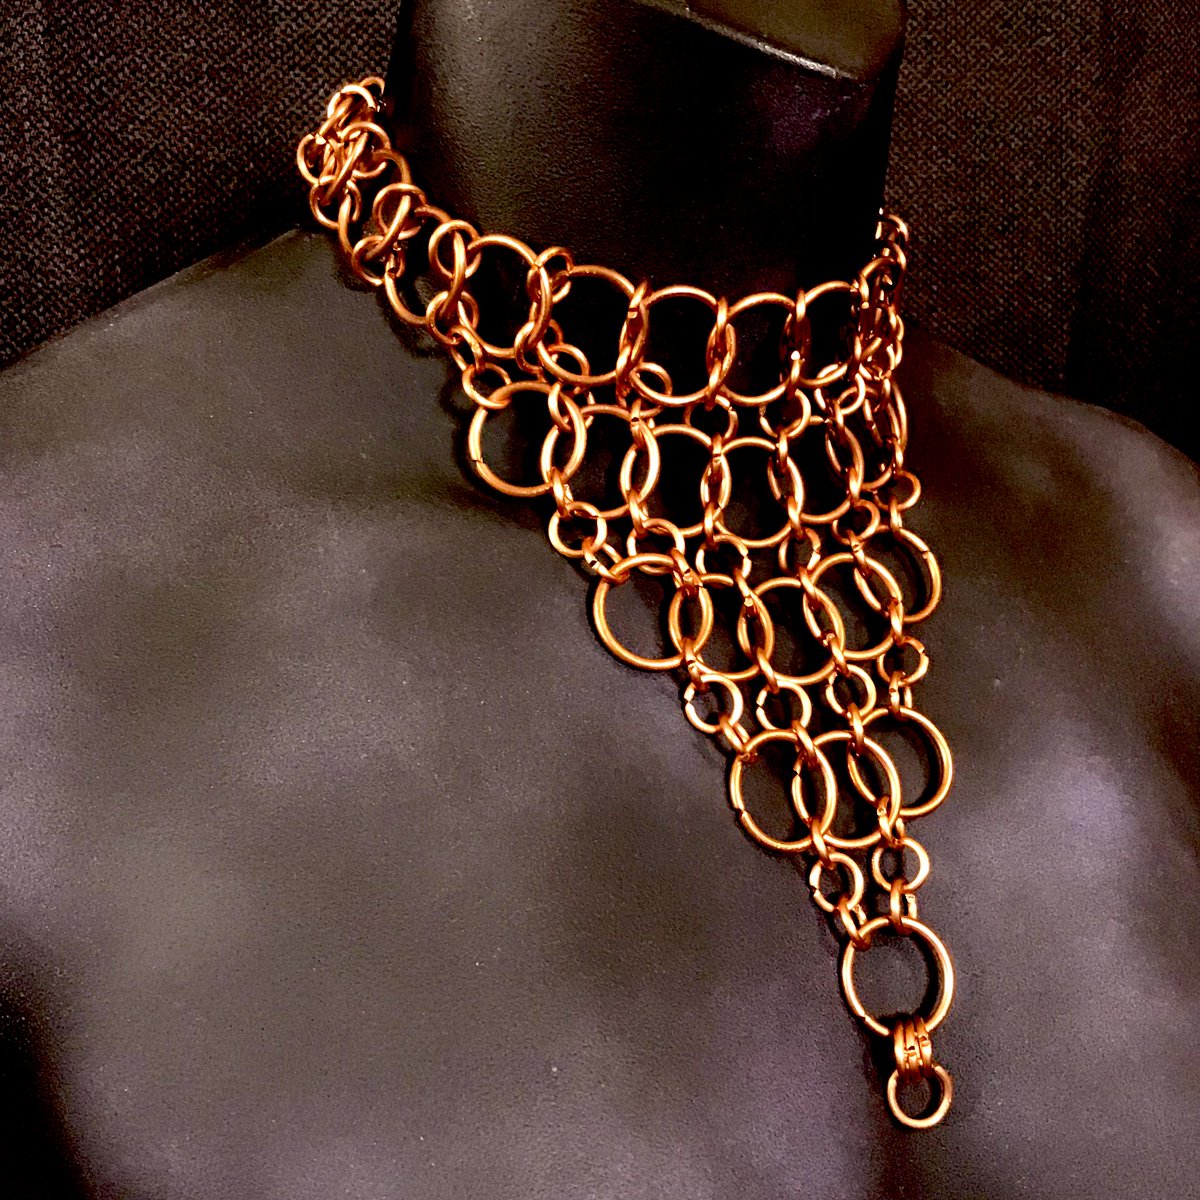 🔶💛🩶SOLID COPPER CHAINMAILLE CHOKER🩶💛🔶To Purchase🫧 #HitTheLinkInMyBio #Chainmaille #ChokerLove #ChainmailleJewelry #JewelryAddict #Handmade #CopperJewelry